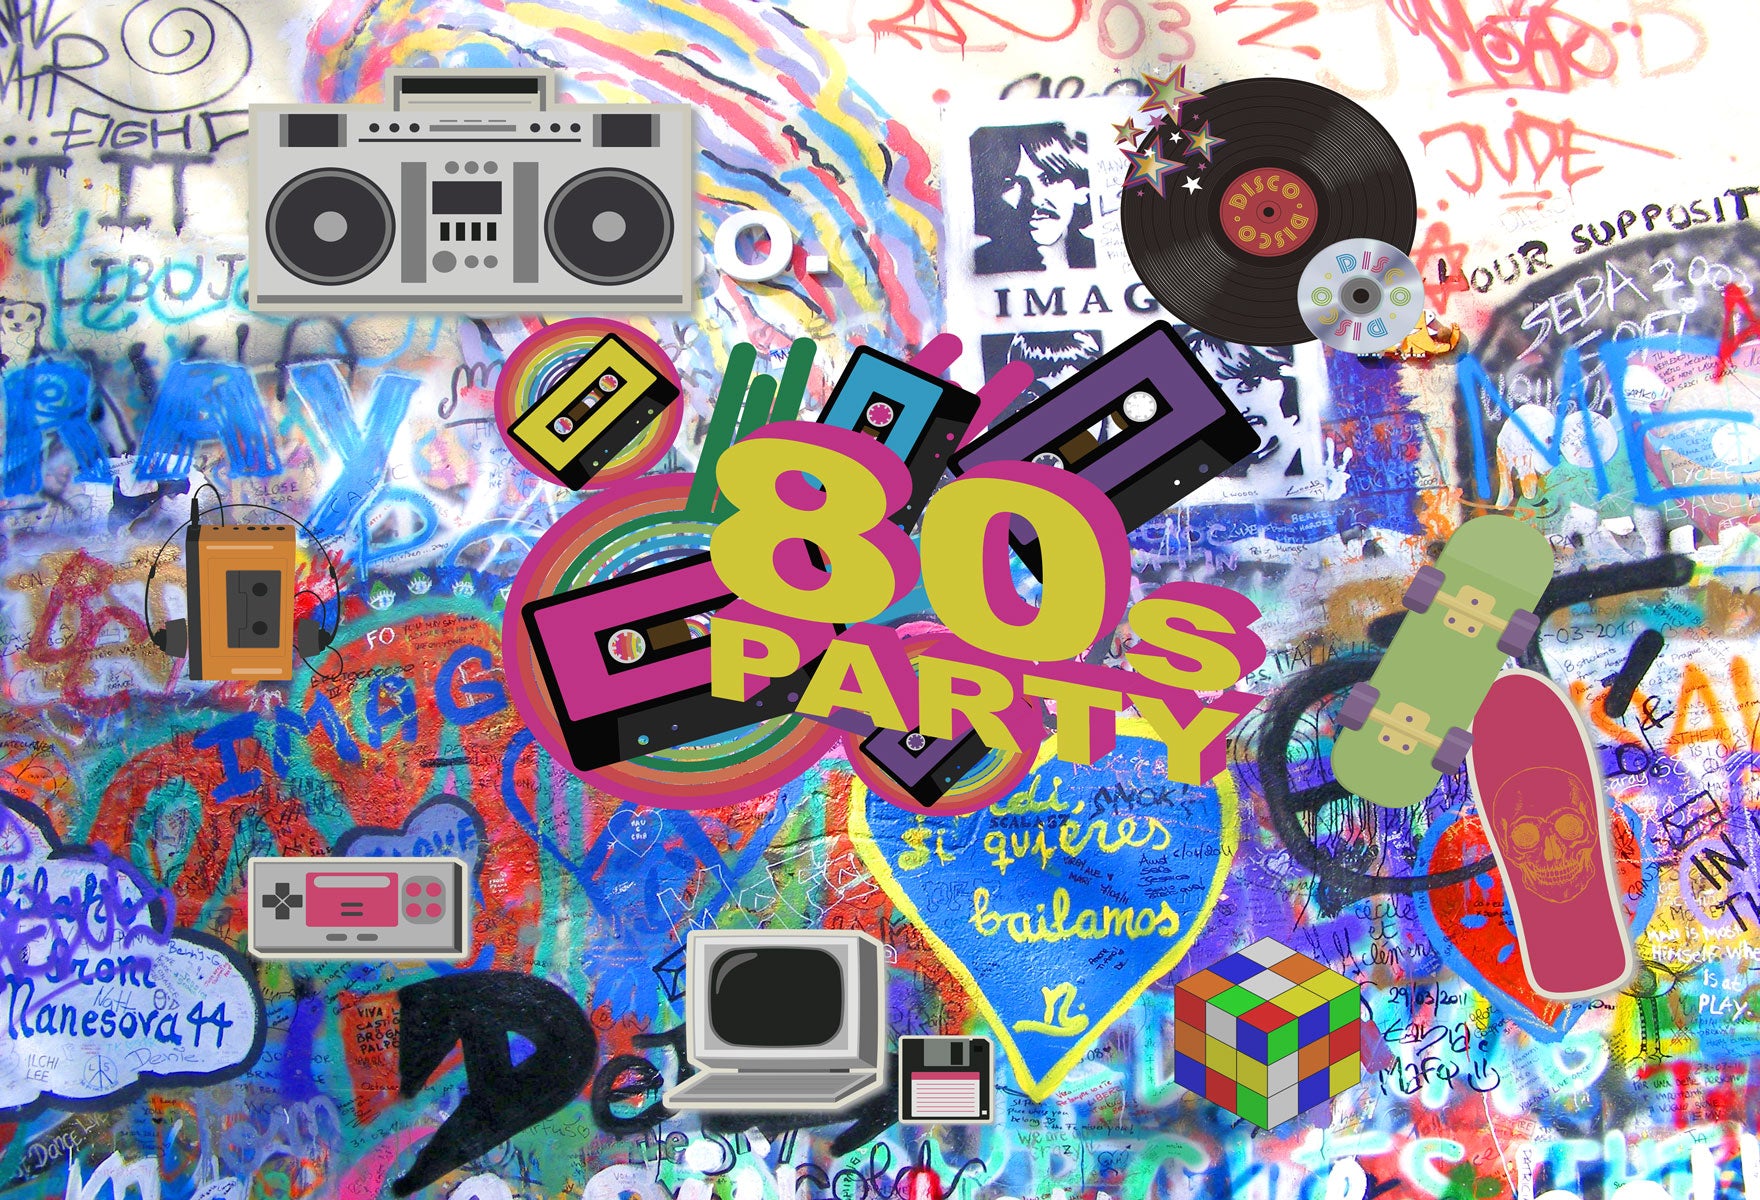 Kate 80's Party Backdrops for Photography - Kate backdrops UK